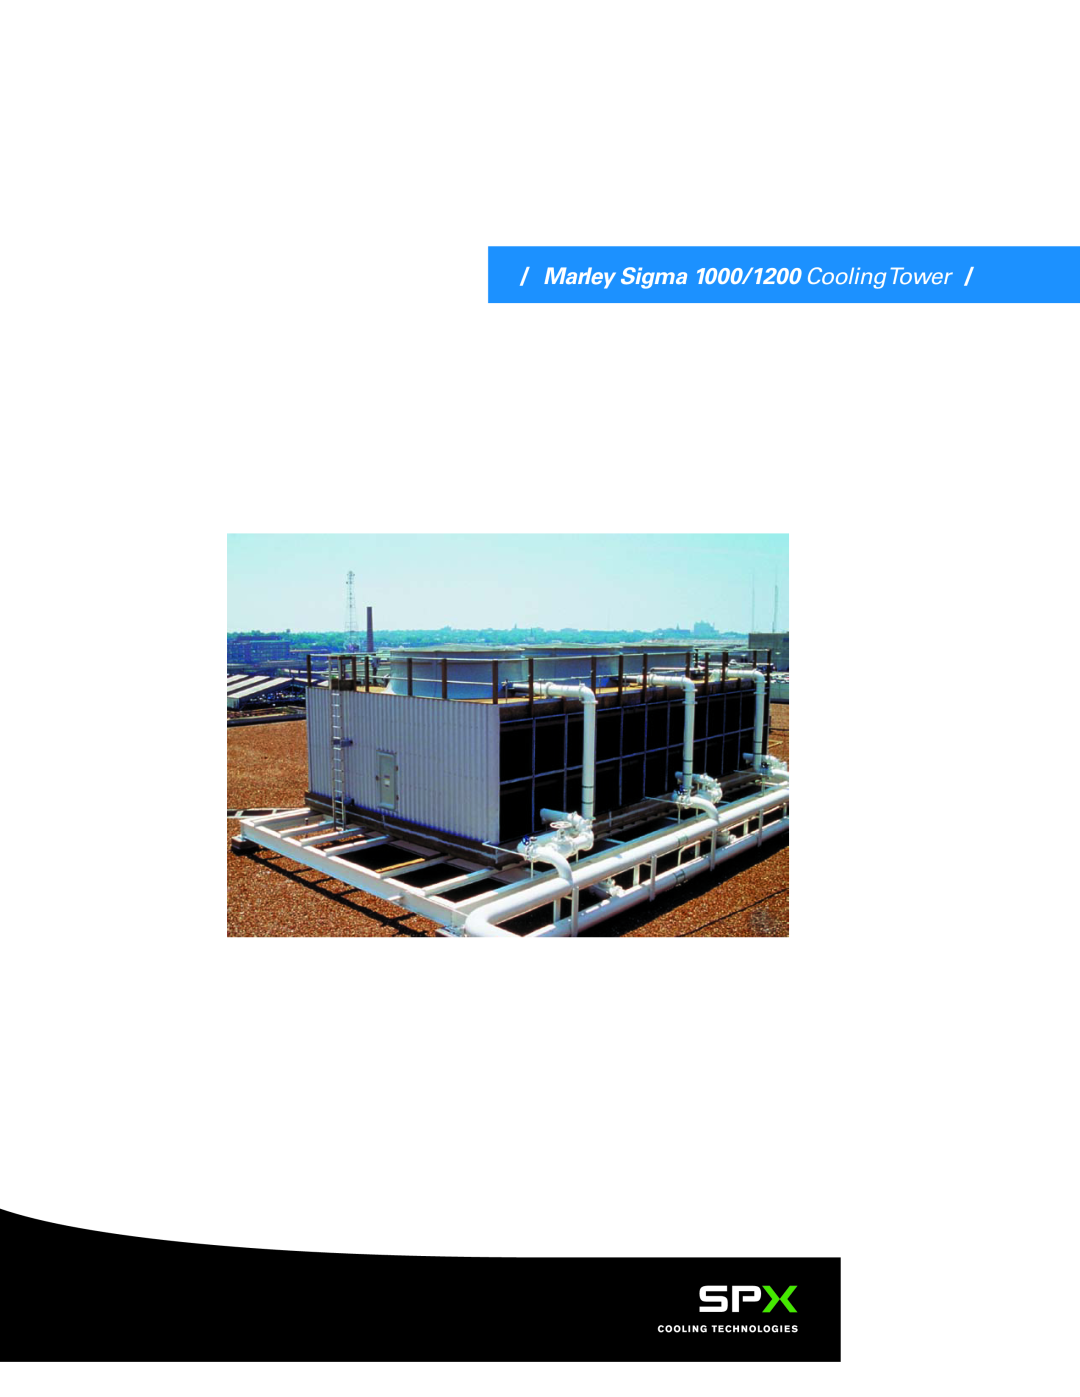 SPX Cooling Technologies specifications Marley Sigma 1000/1200 Cooling Tower, Engineering Data & Specifications 